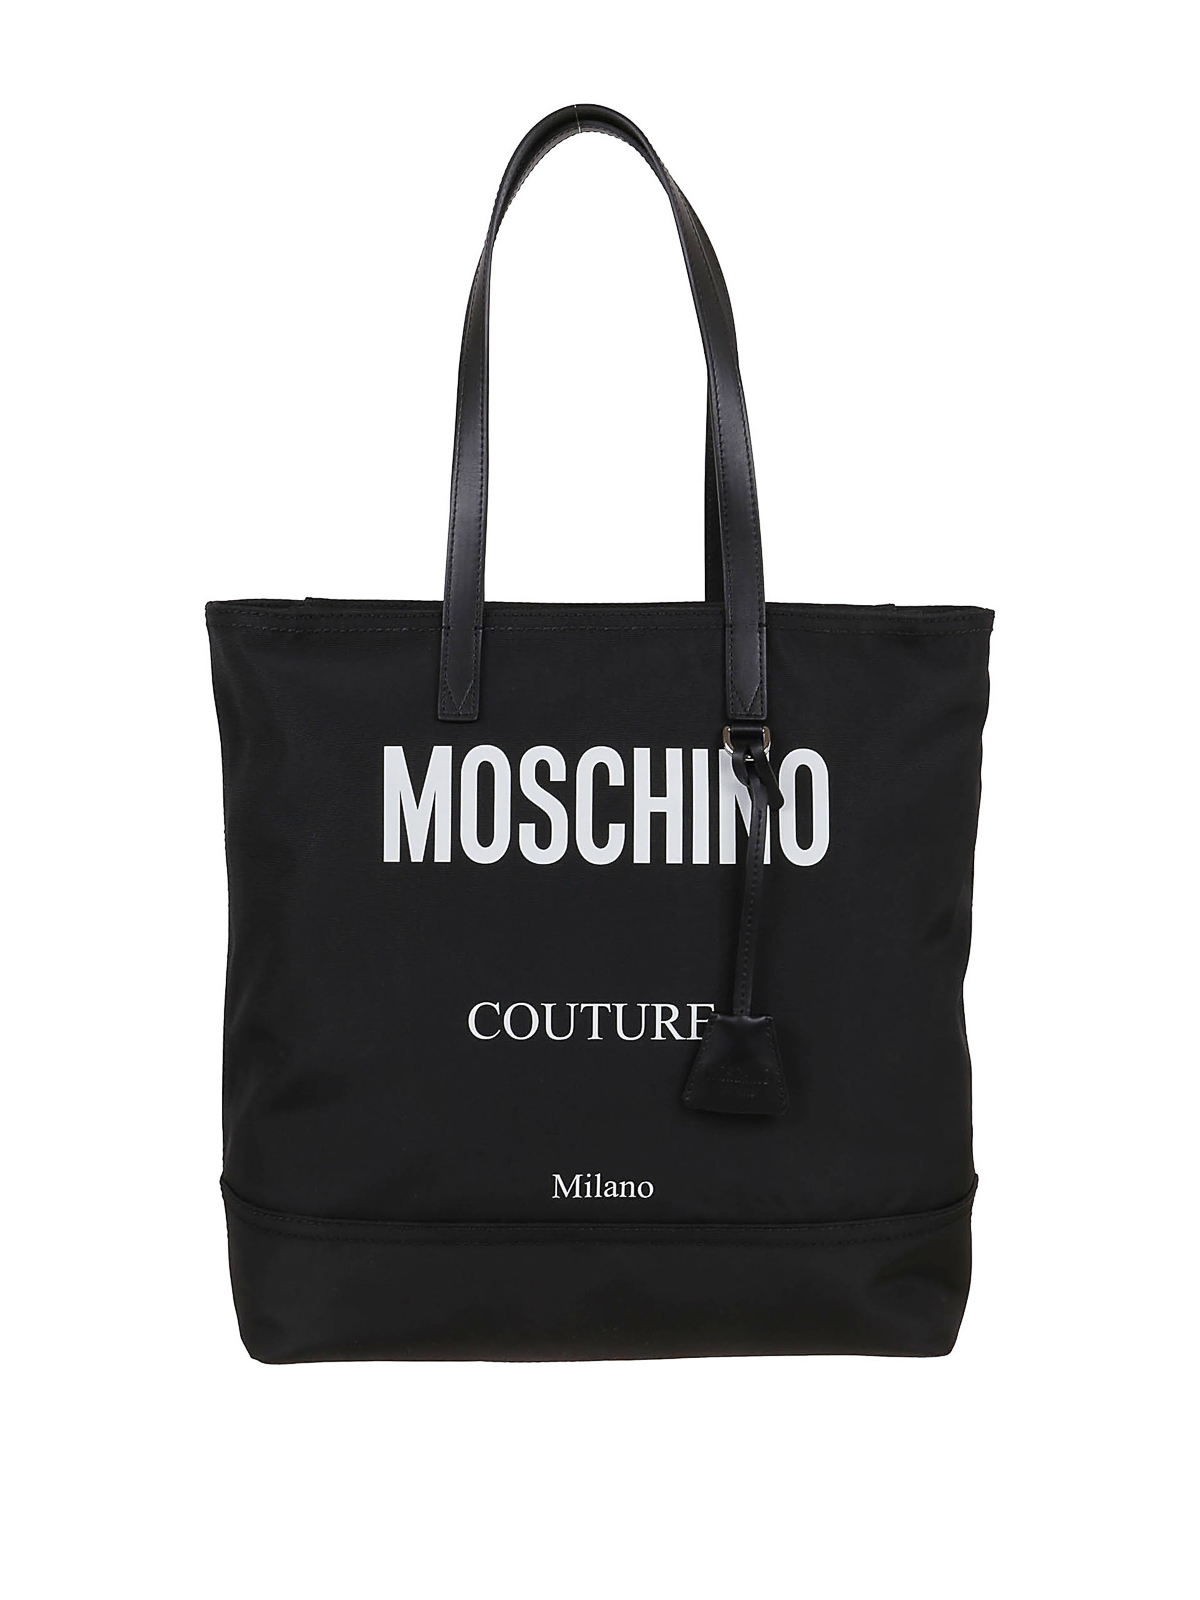 Totes bags Moschino - Nylon tote - 742382012555 | Shop online at iKRIX